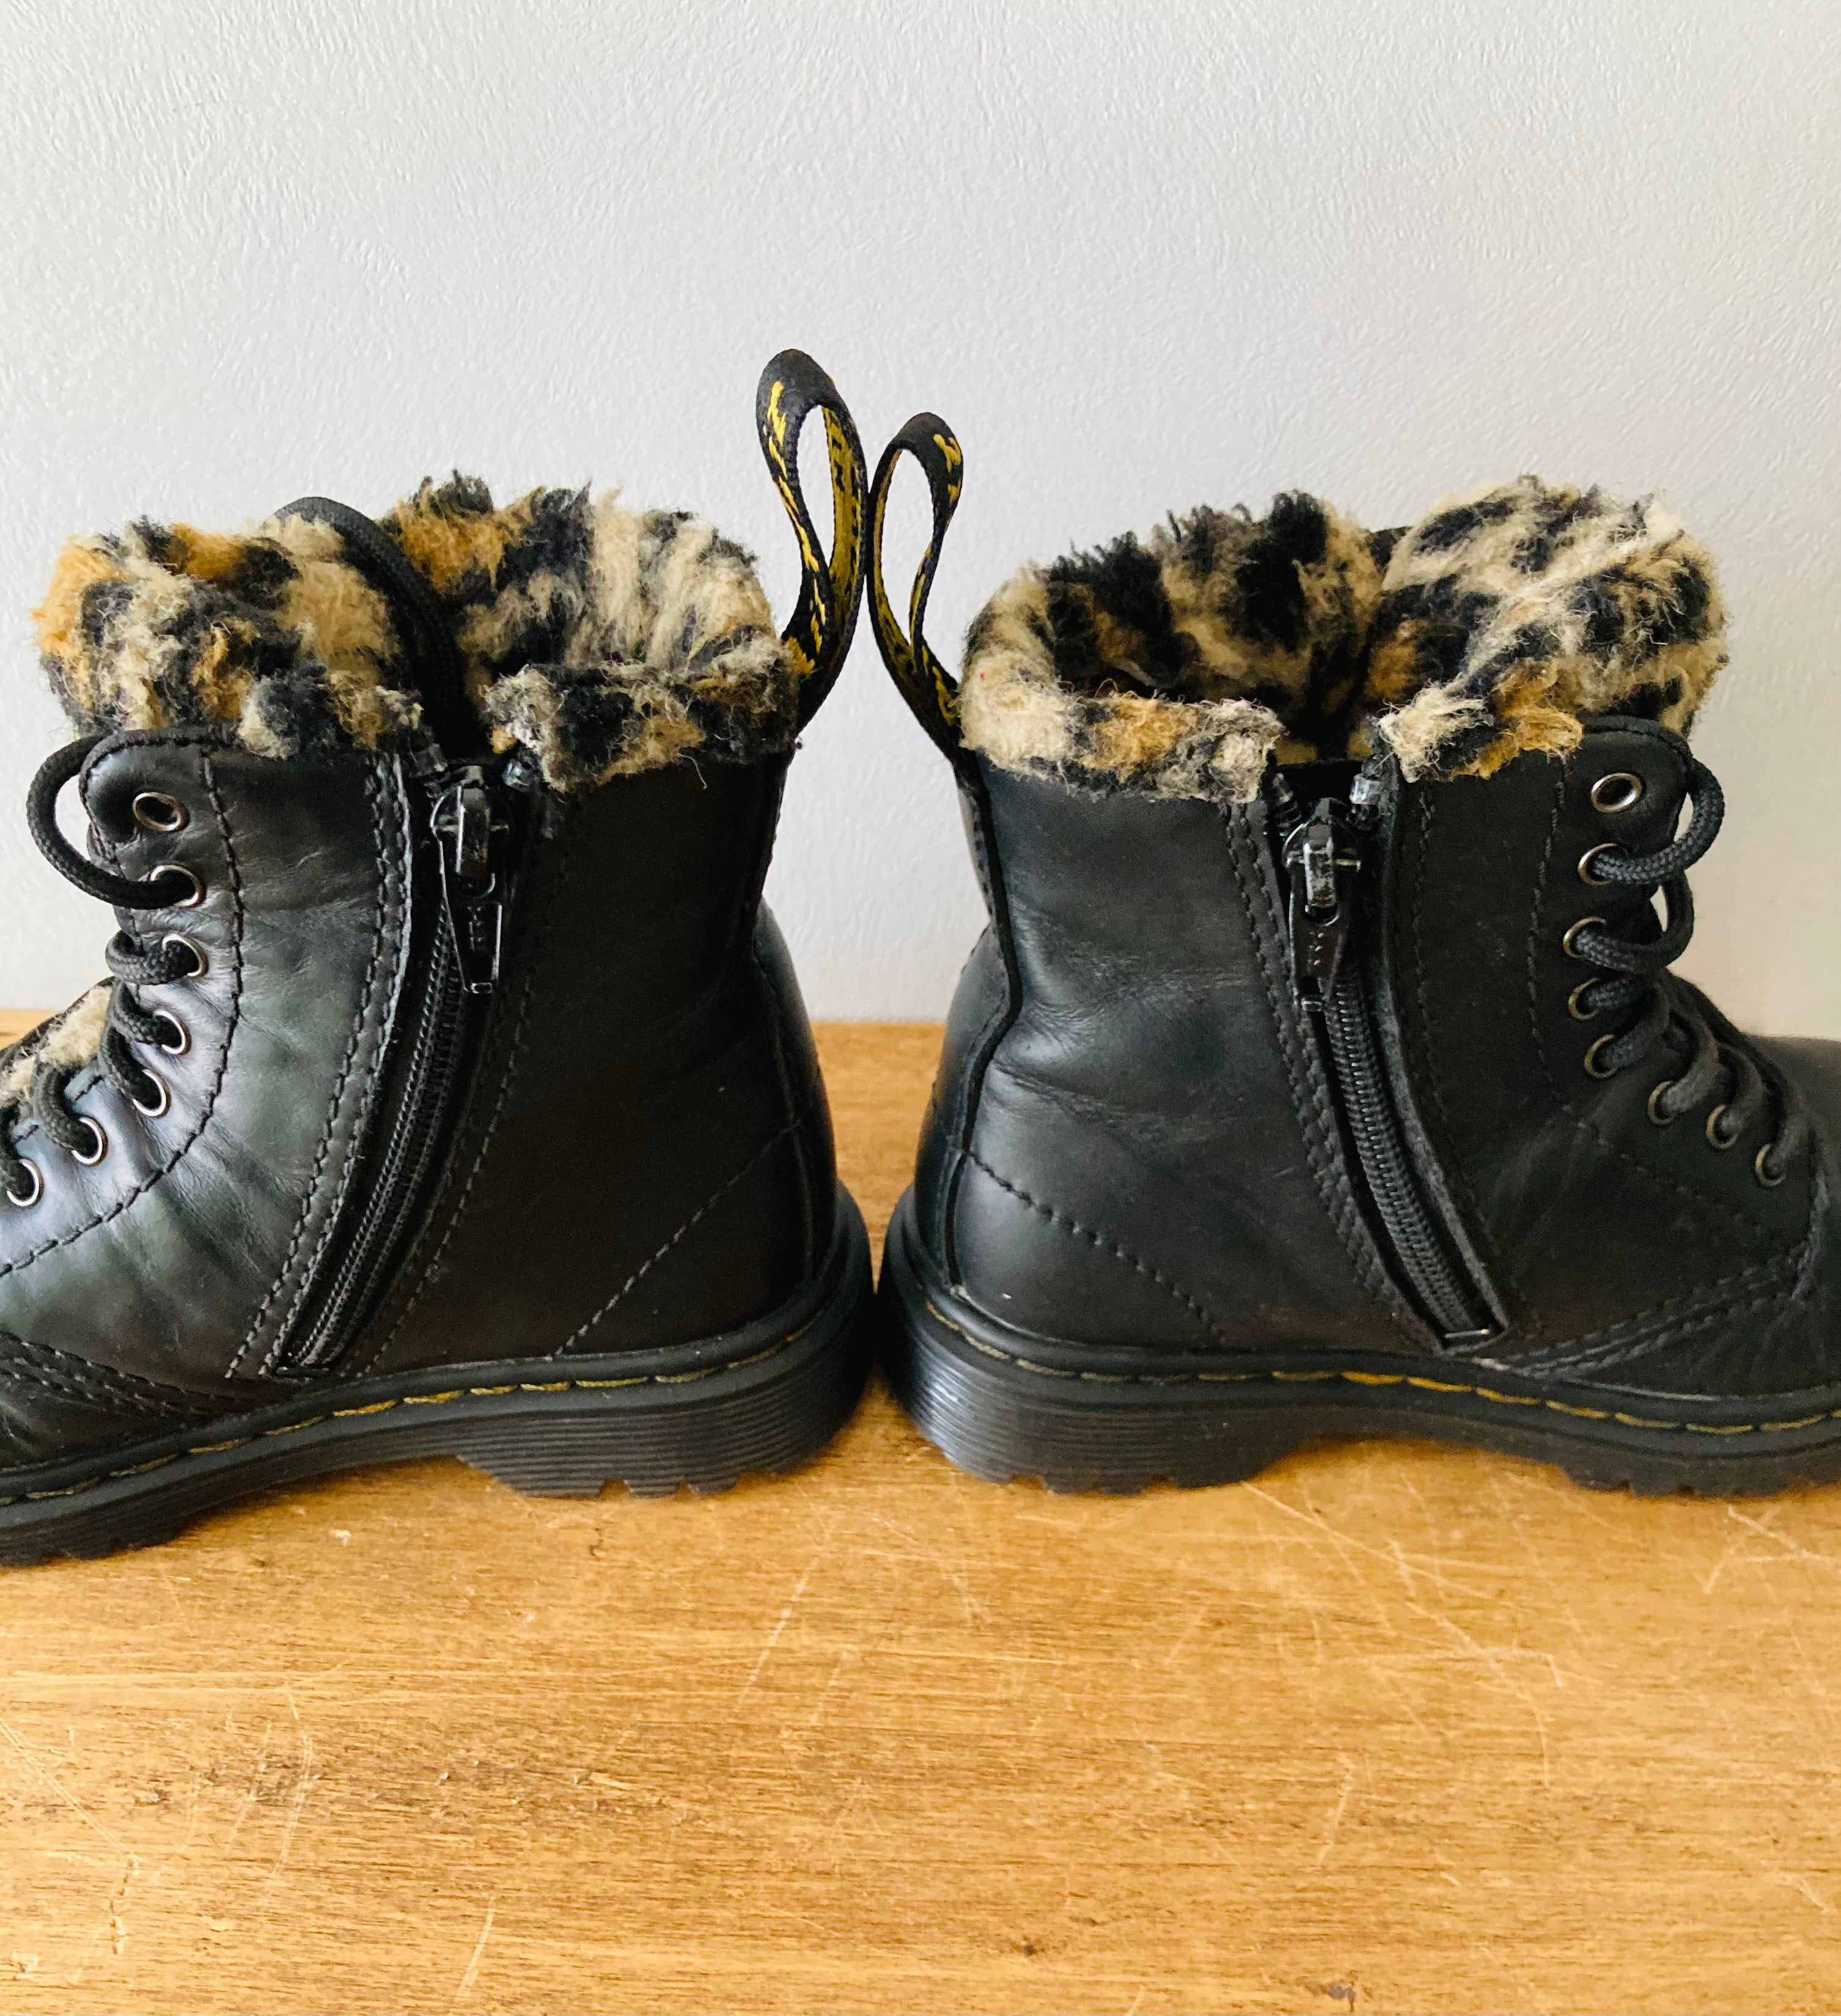 Rebels Make a Difference Leopard Lined DM's Infant Size 7